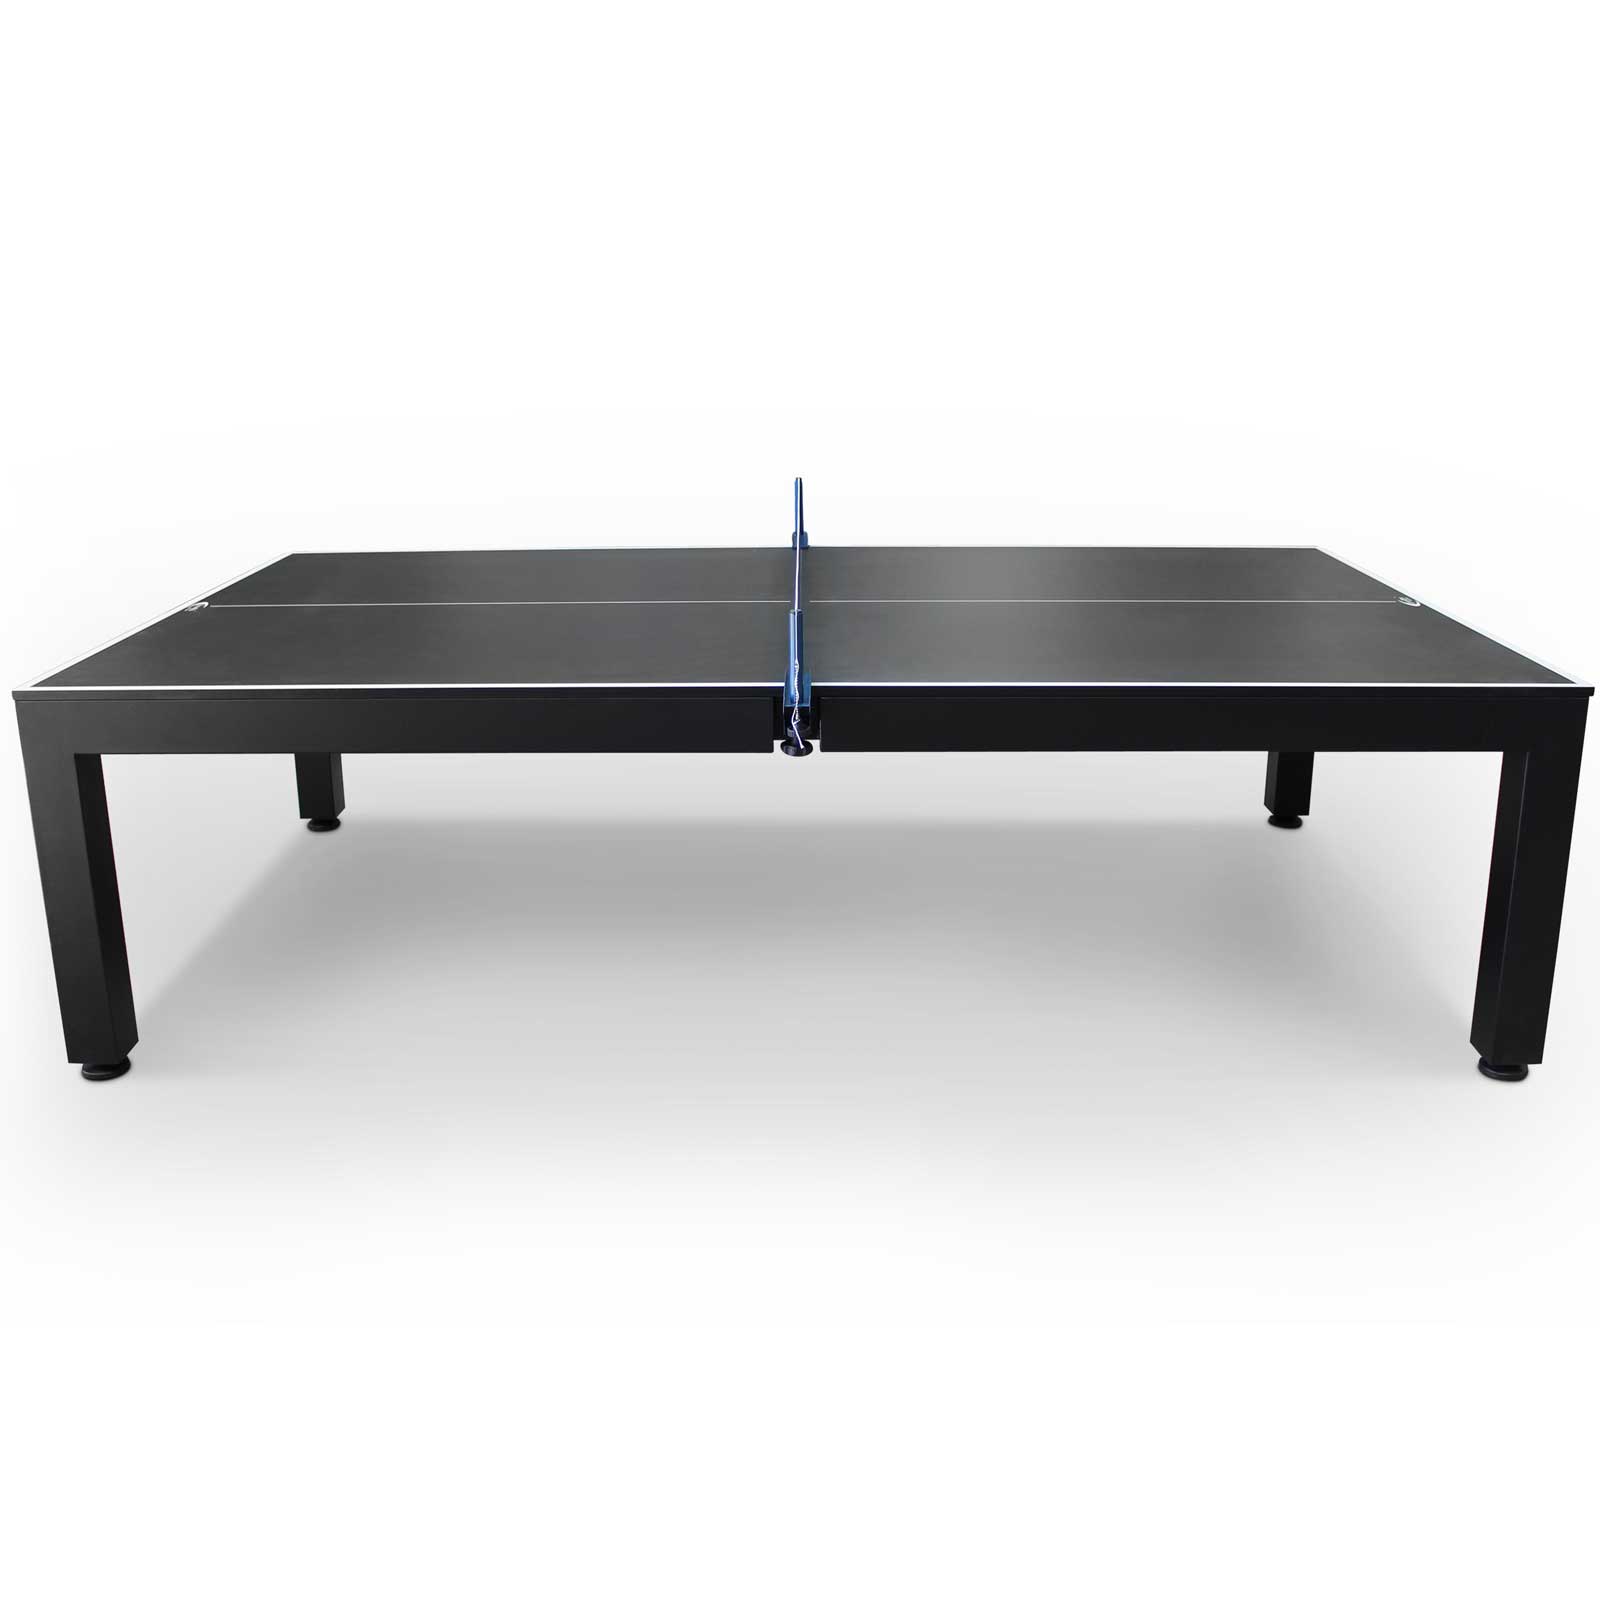 Challenger (Dining Table Style) Table Tennis Ping Pong Table